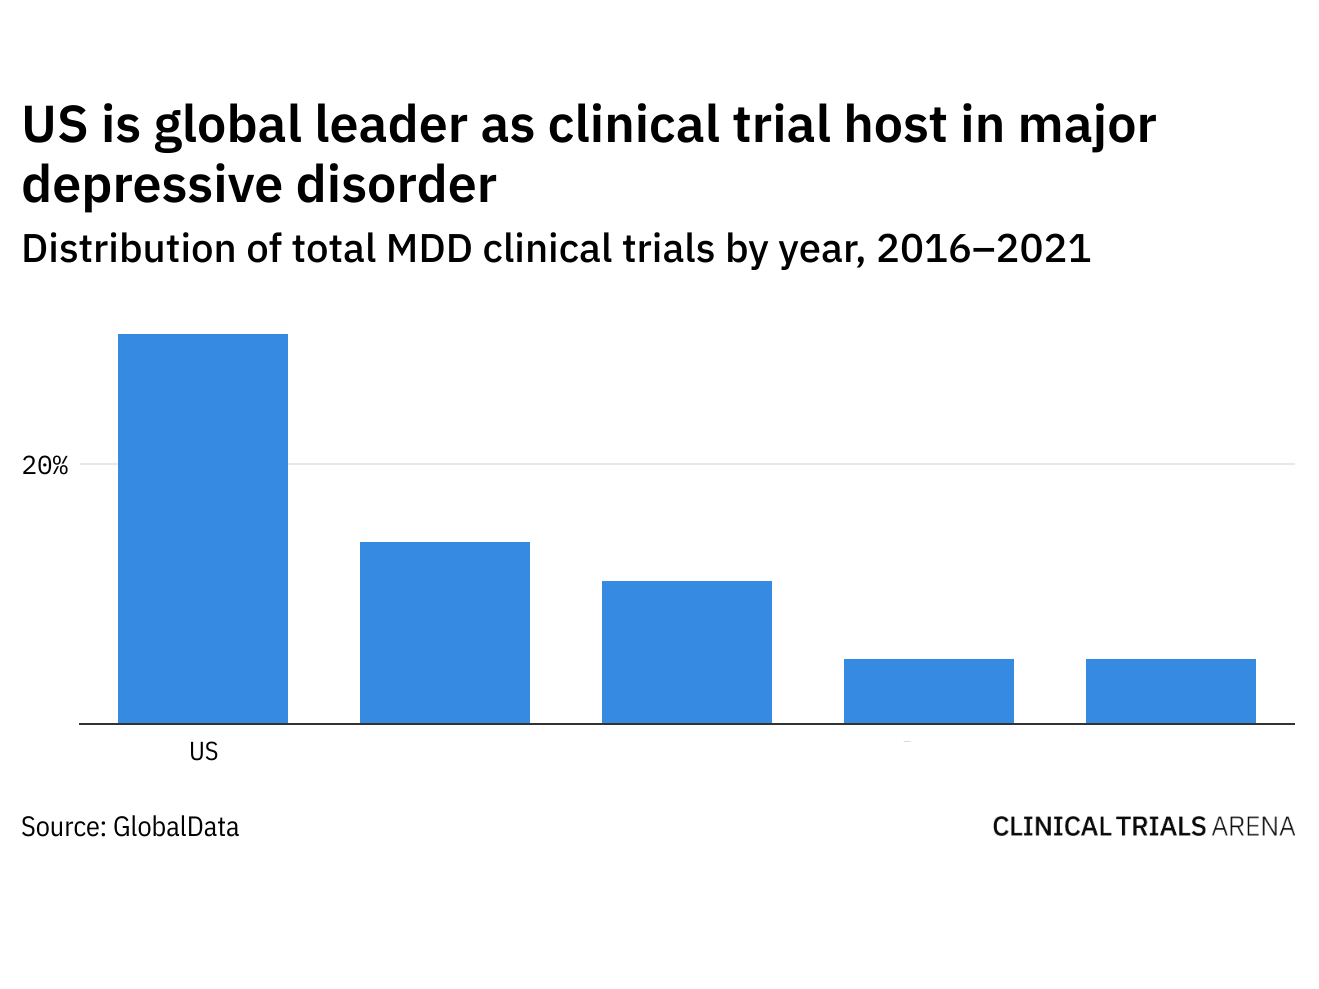 Major depressive disorder: where are the top clinical trial locations?